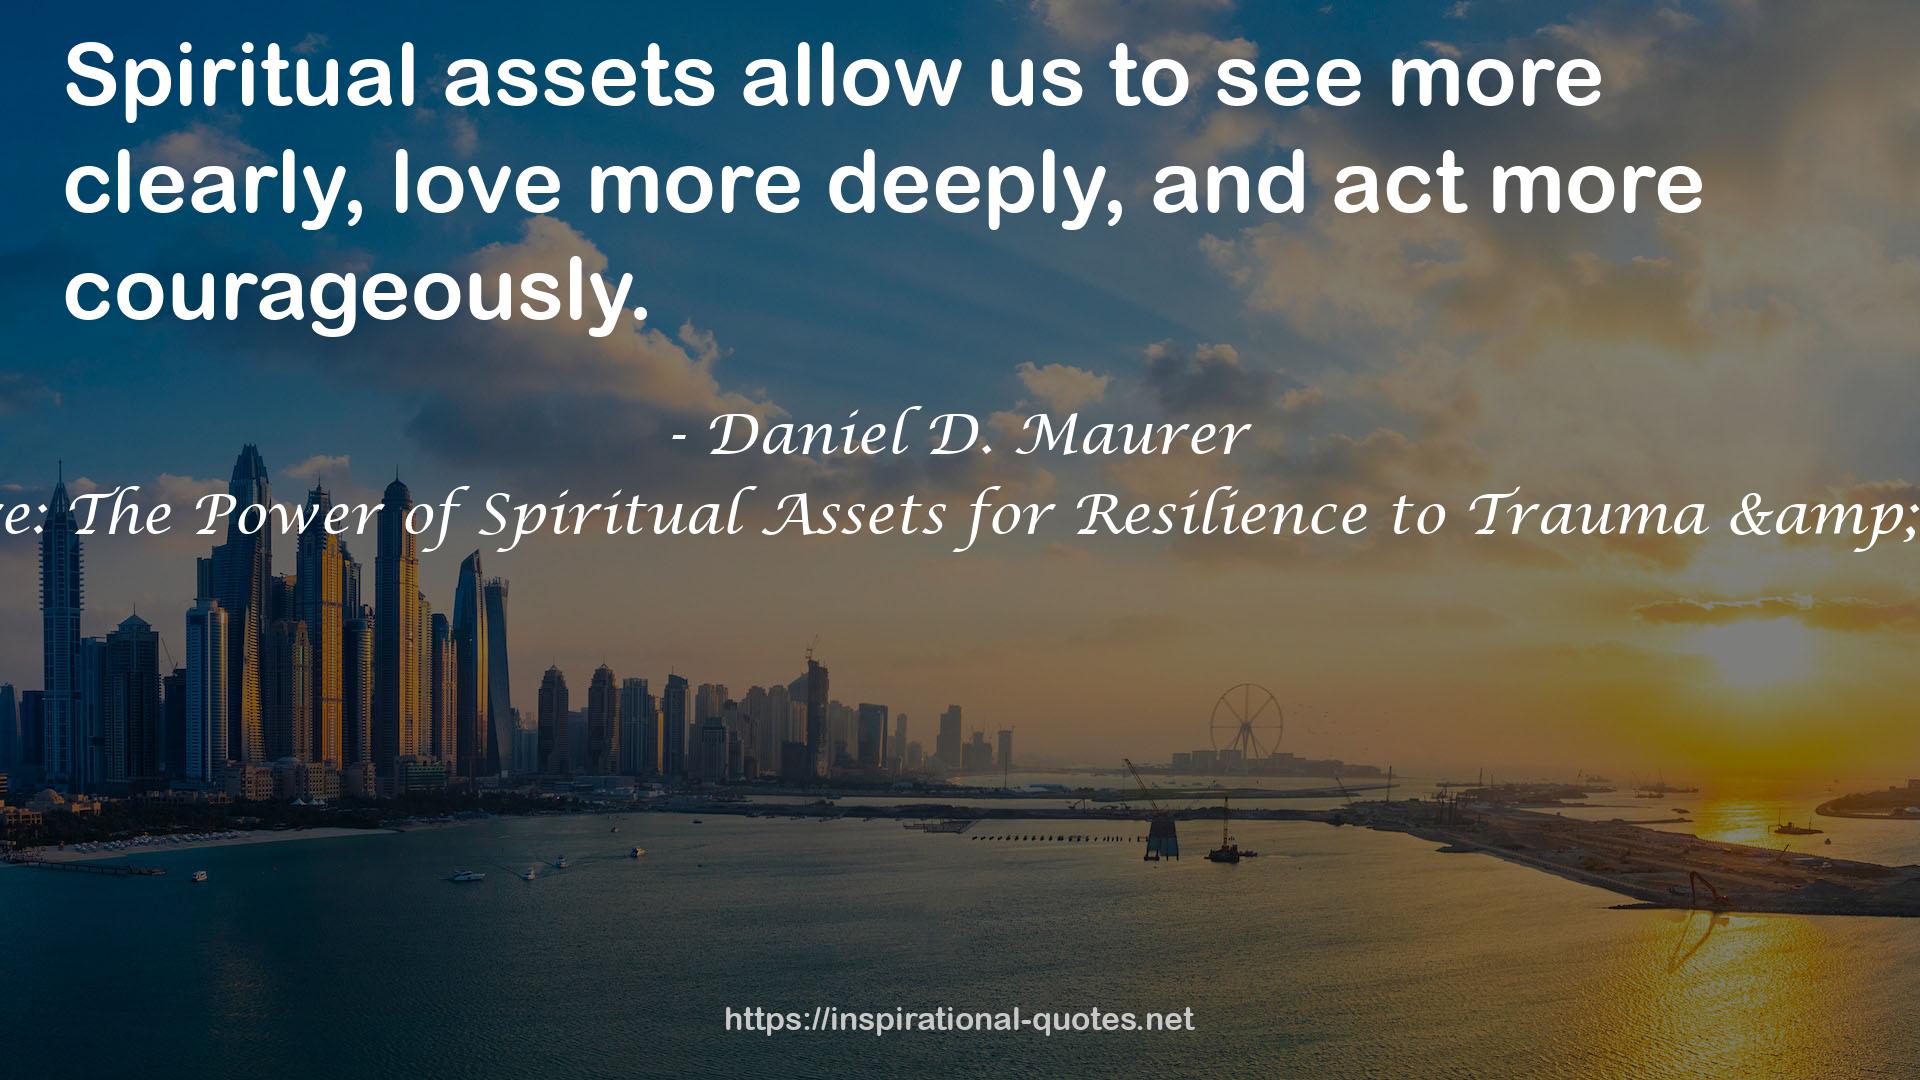 Endure: The Power of Spiritual Assets for Resilience to Trauma & Stress QUOTES